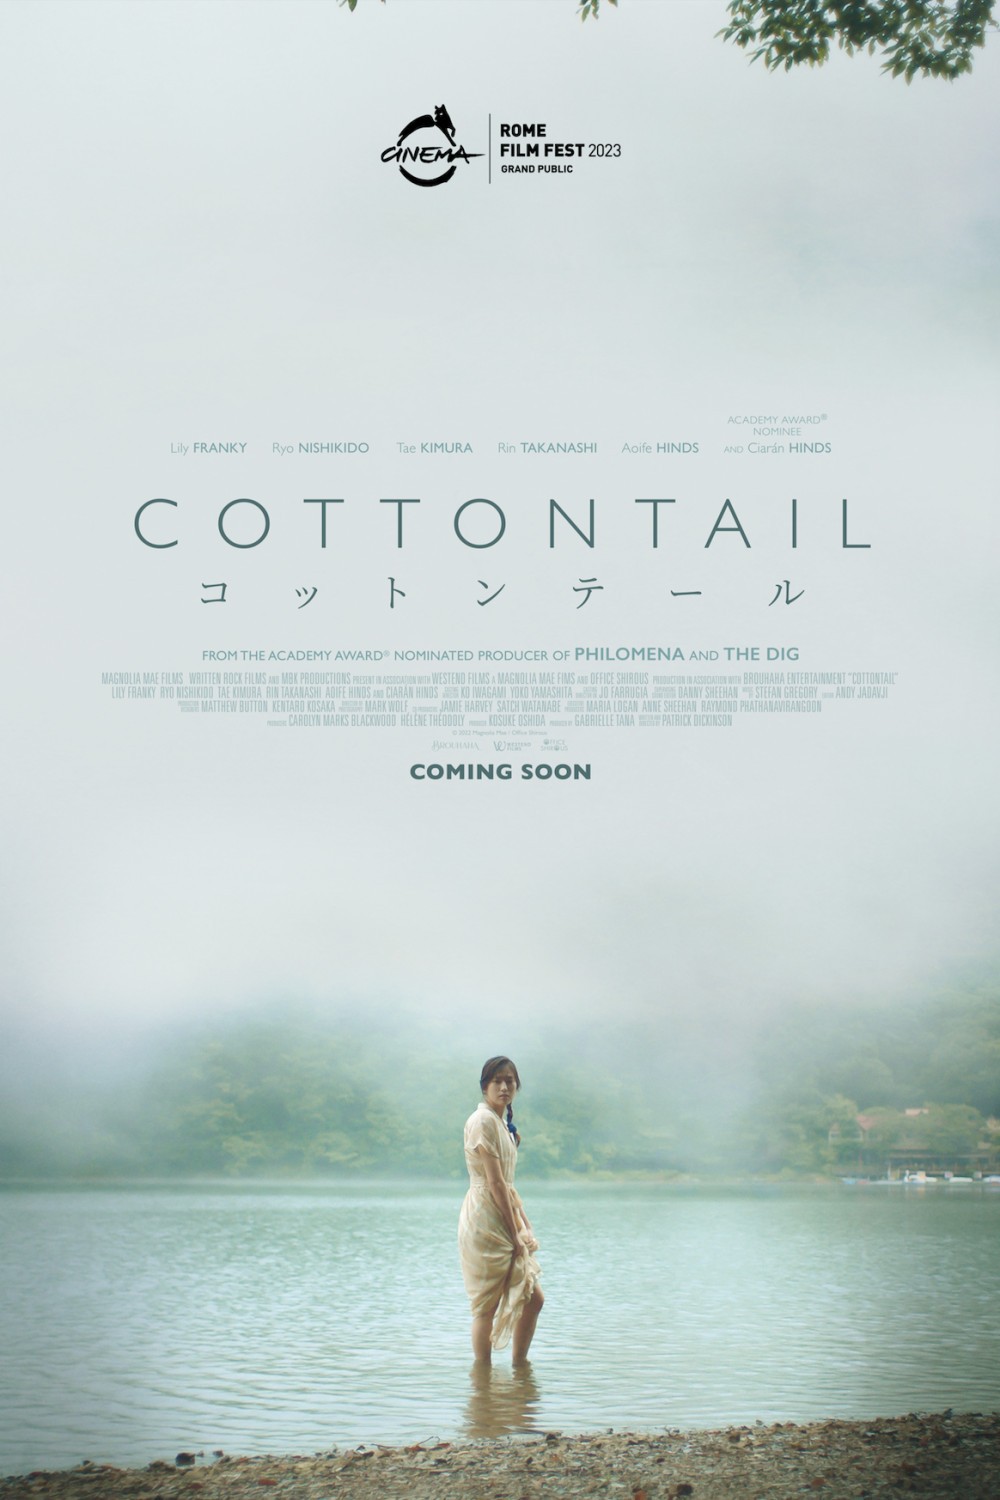 A Japanese man heads to England to scatter his wife’s ashes in the Cottontail trailer